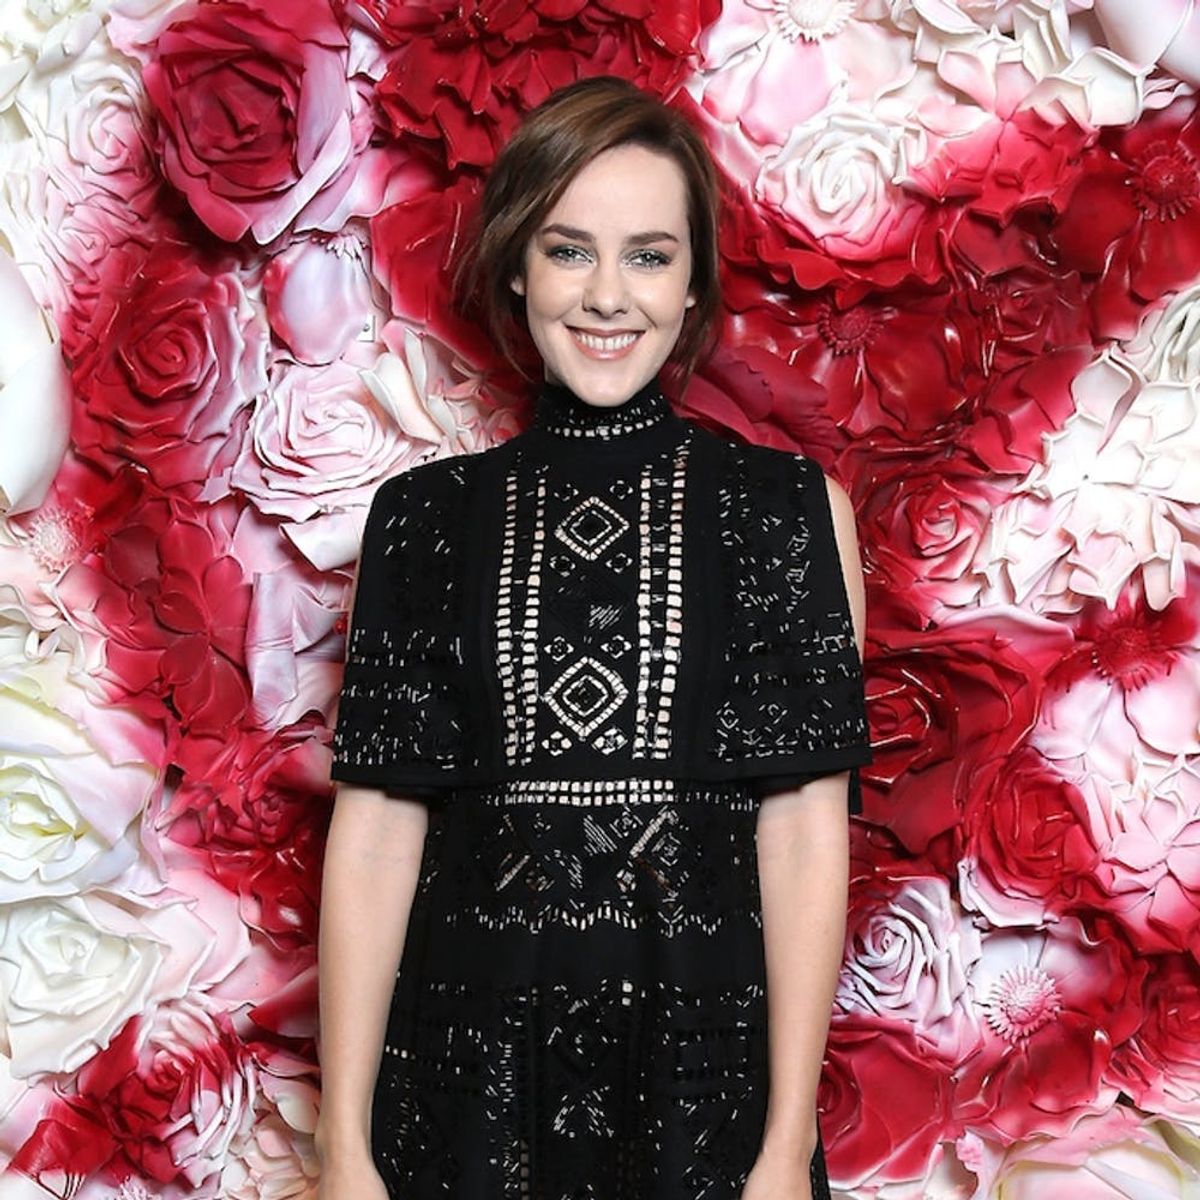 Jena Malone Just Revealed Her Baby Bump in the Sweetest Way